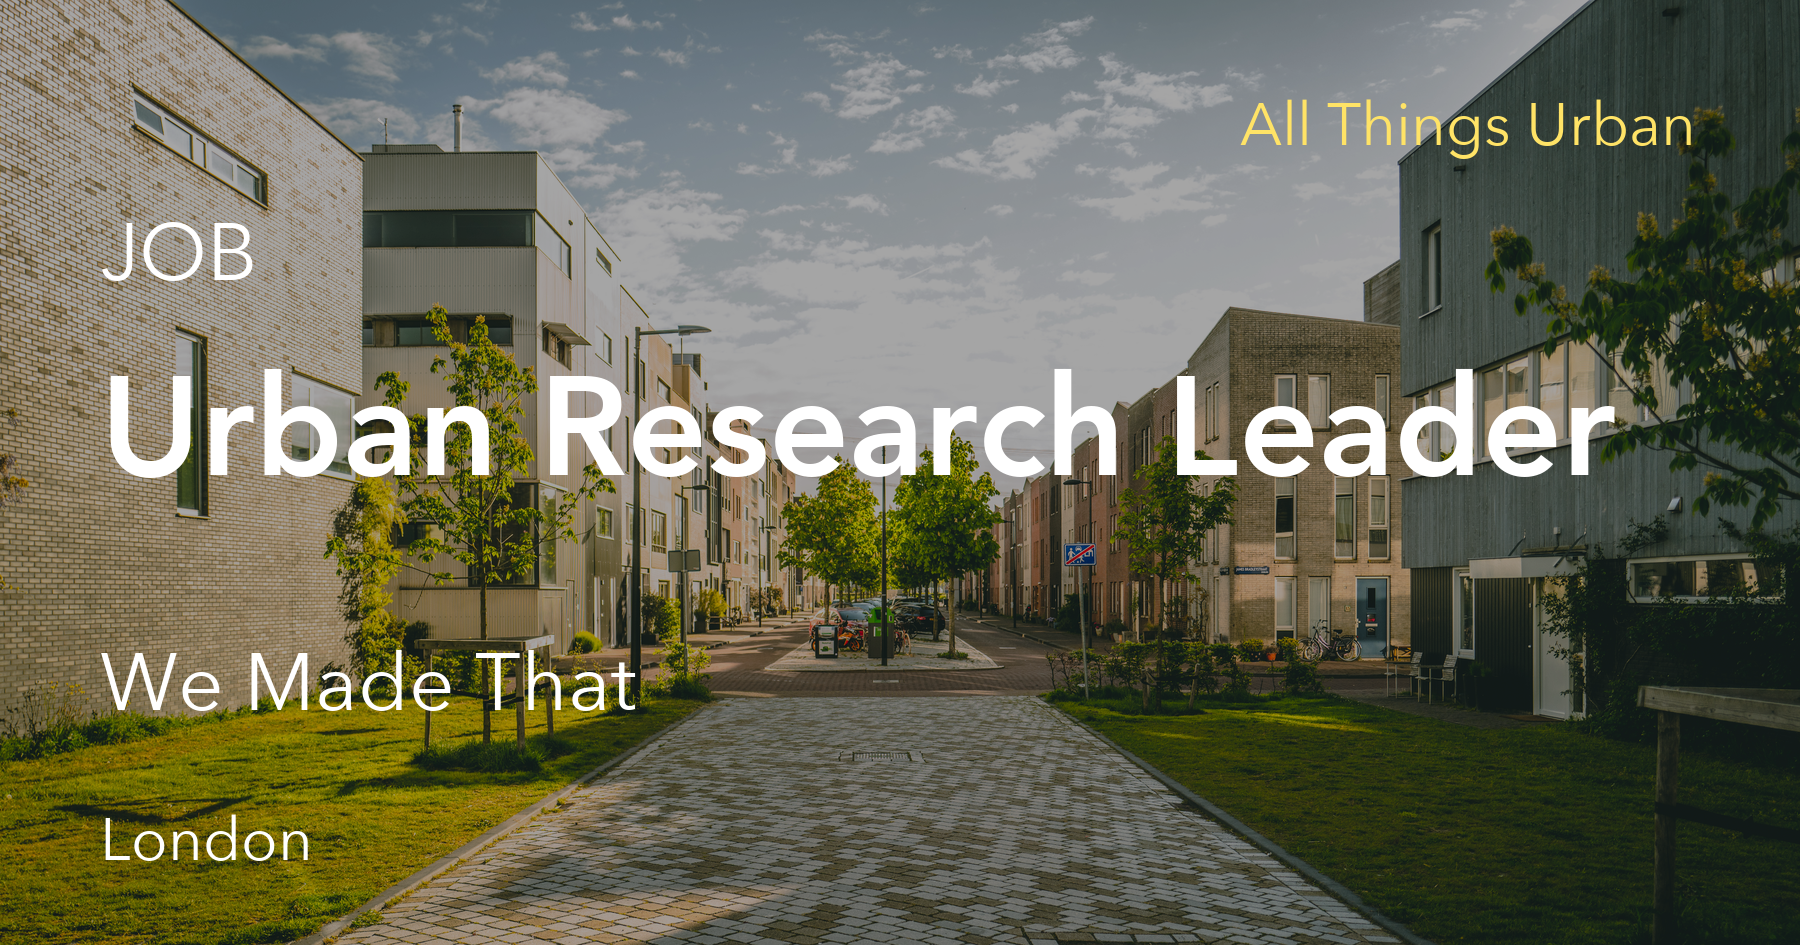 All Things Urban - Urban Research Leader at We Made That